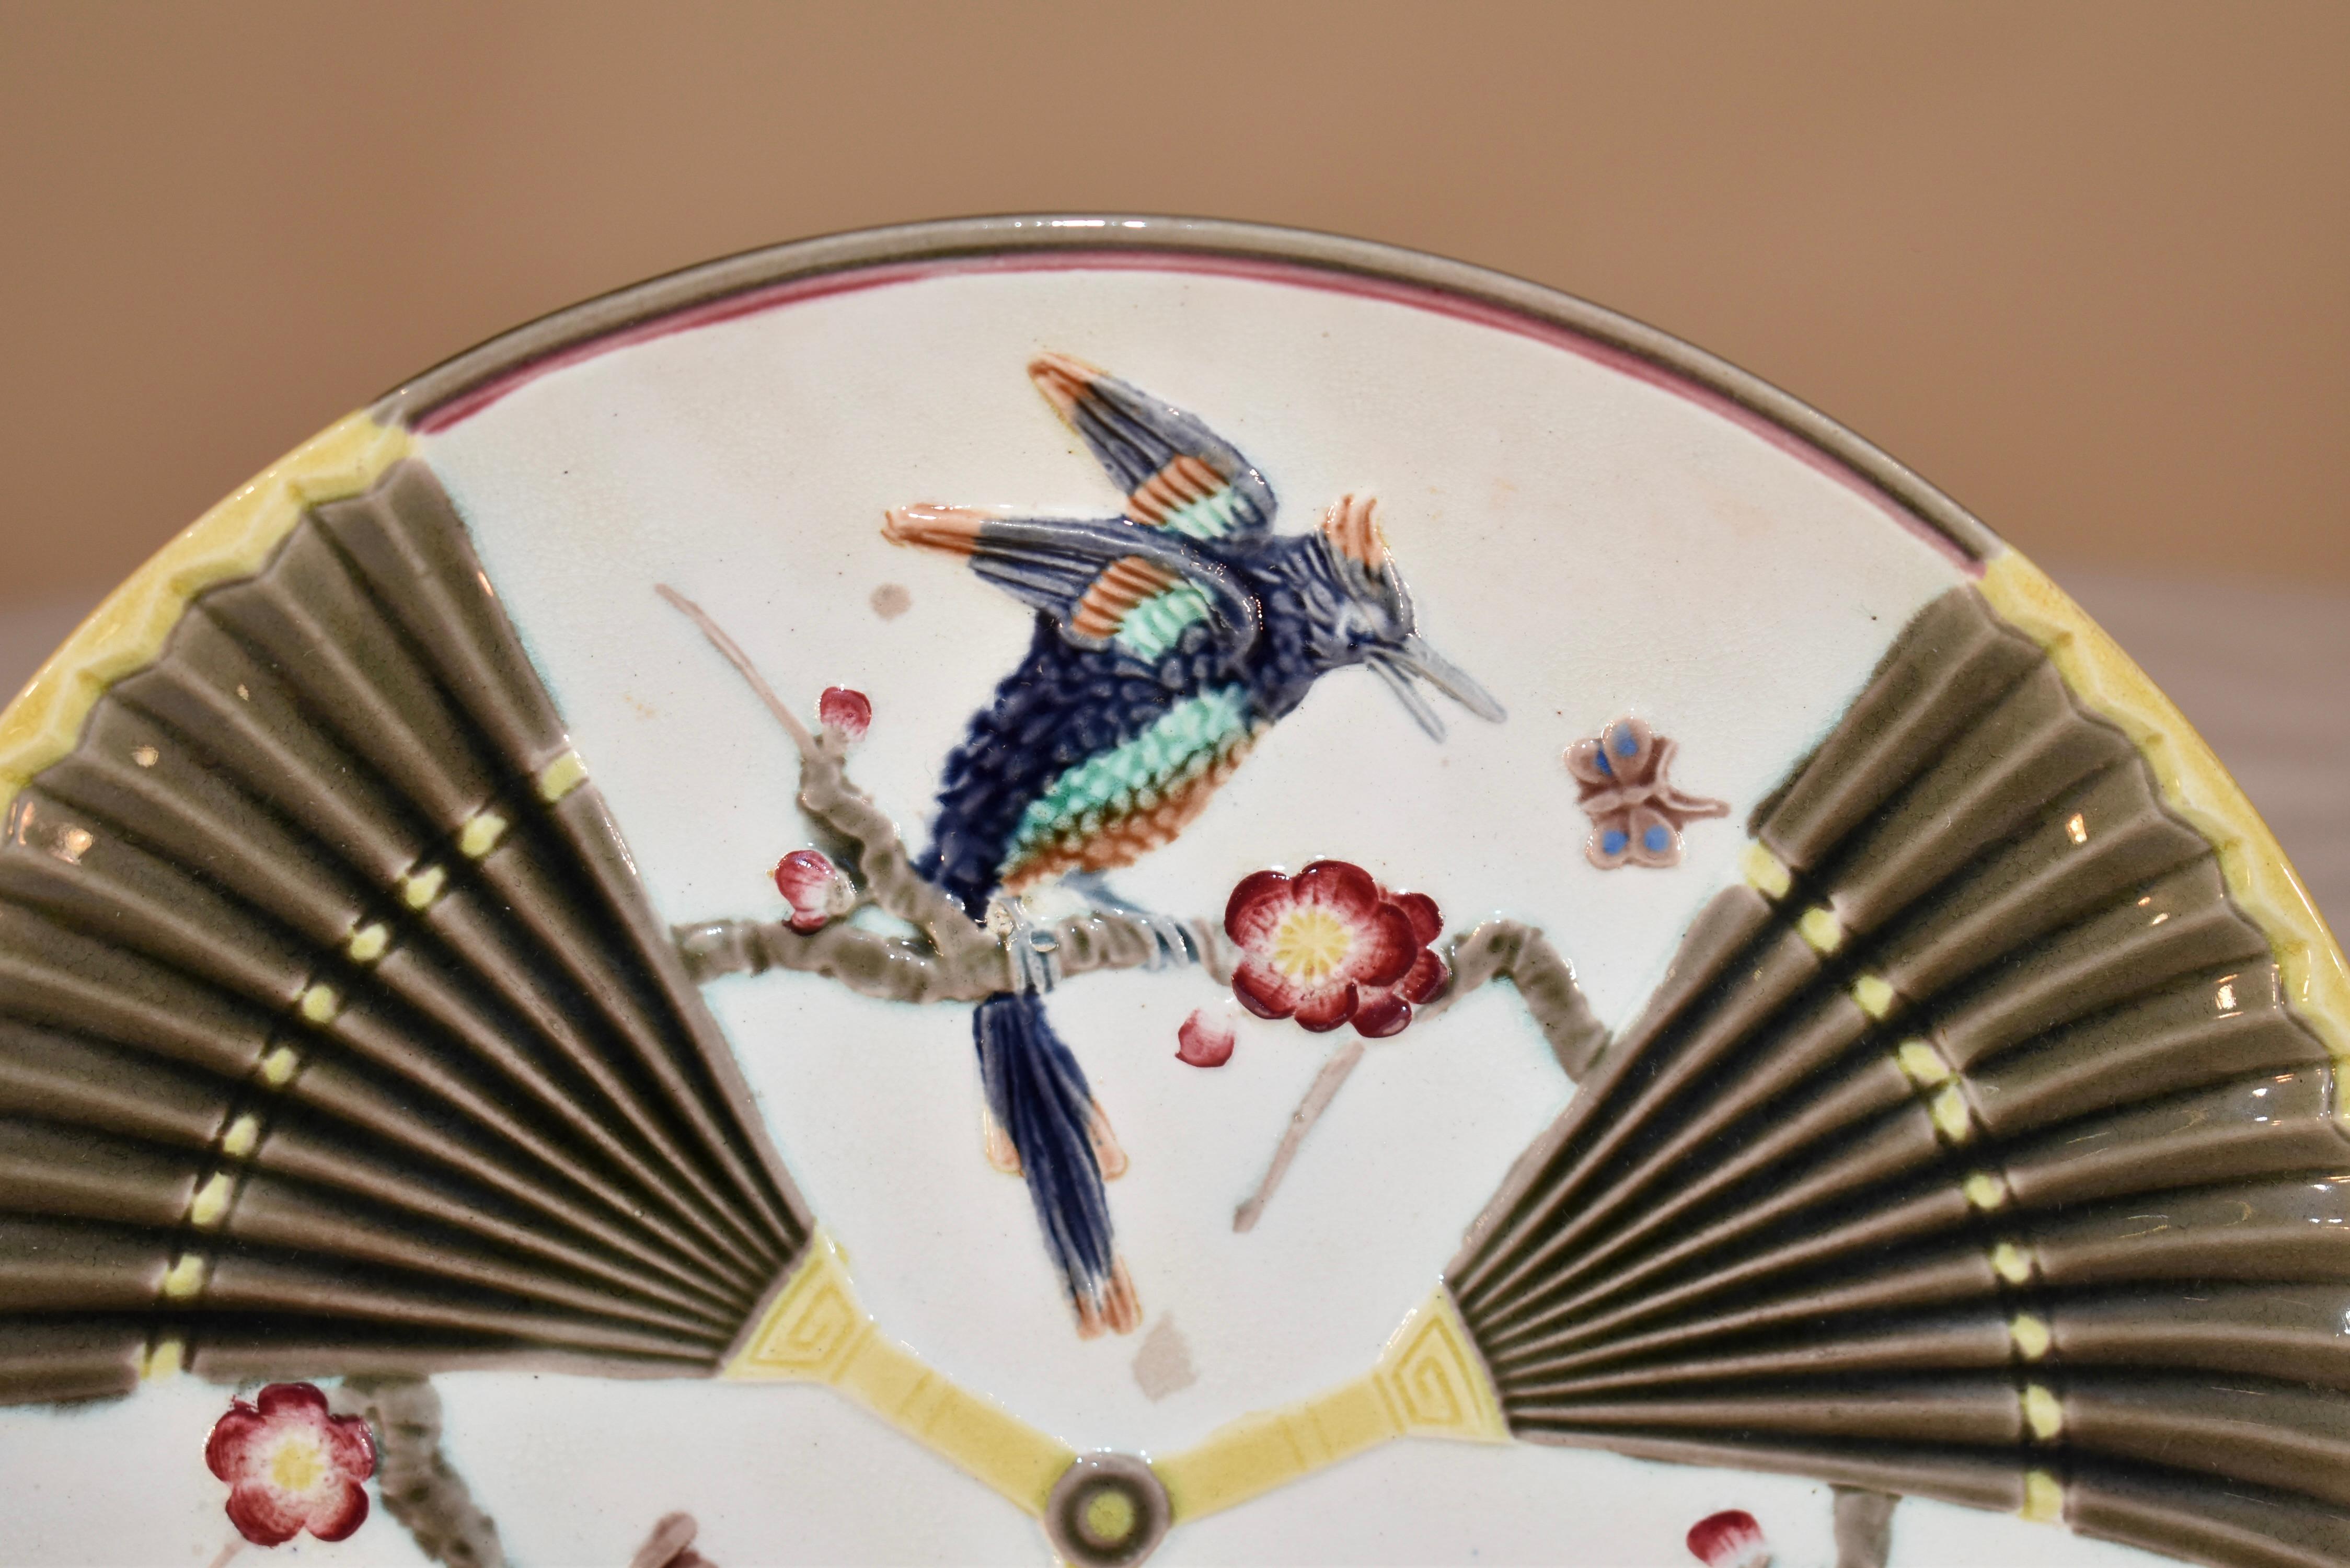 19th Century majolica bird and fan pattern plate from England. There is an impressed WEDGWOOD mark on the back of the plate. The colors are vibrant and lovely. There is a date lozenge as well on the back, but is not readable.